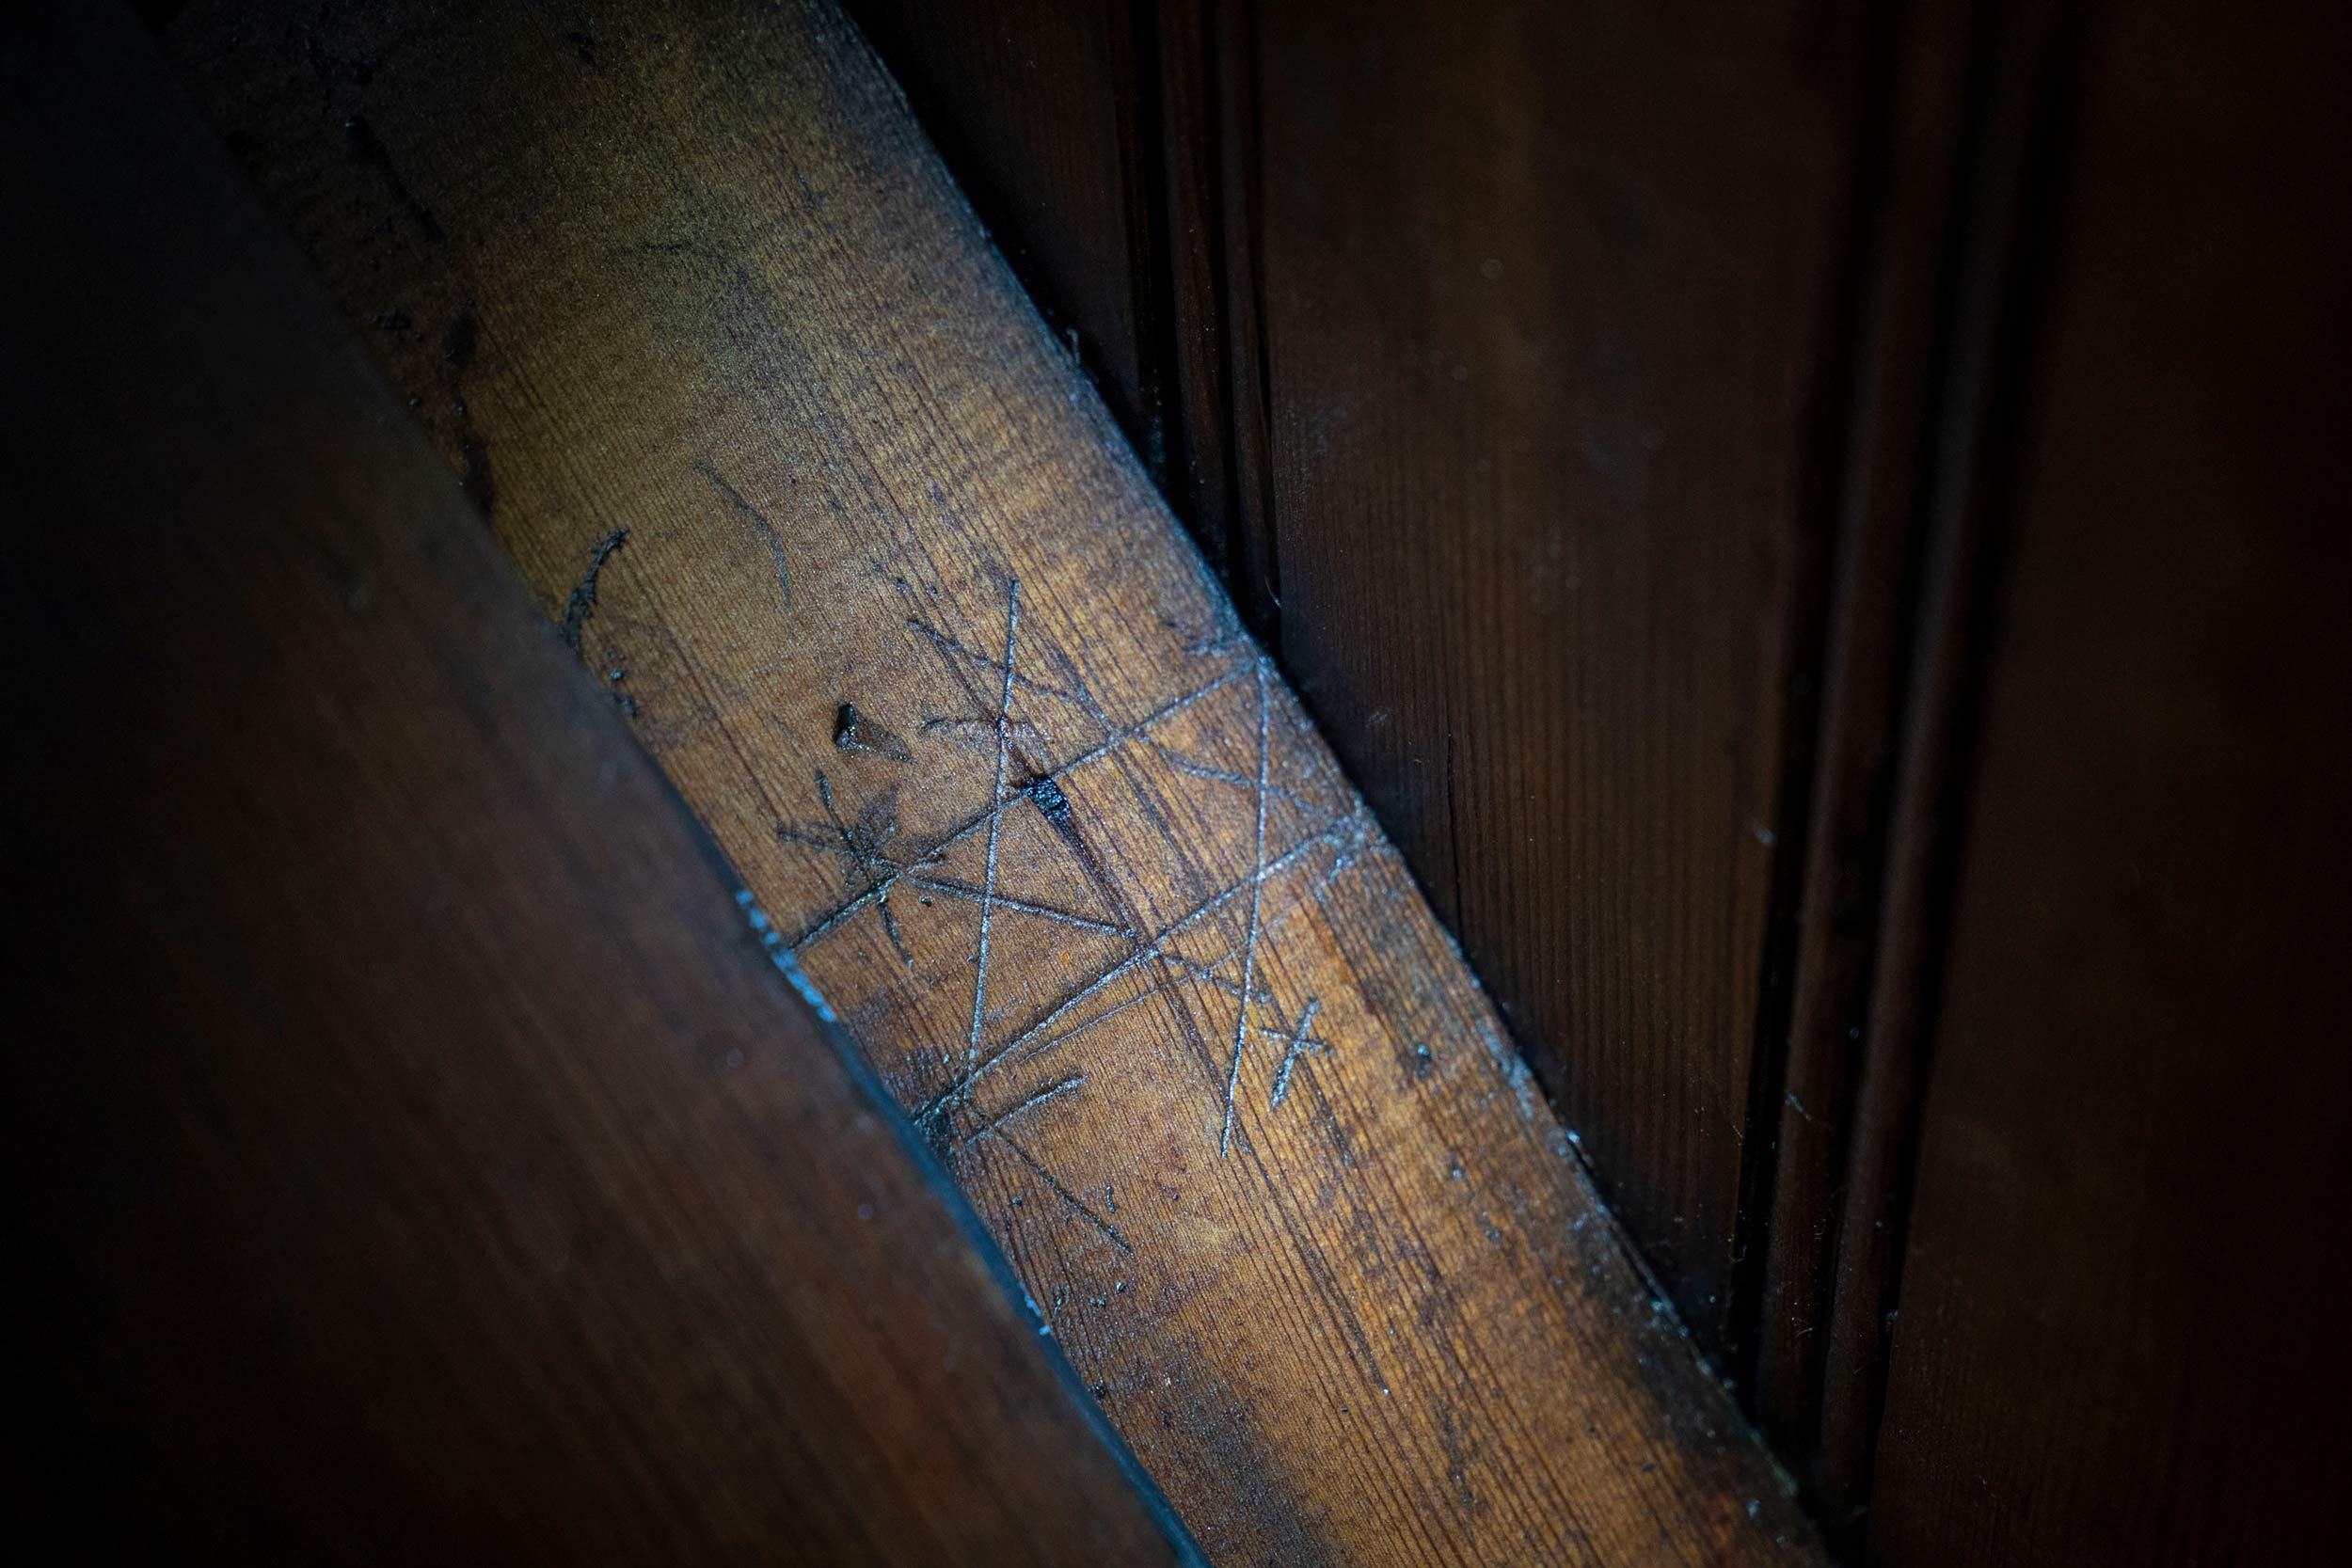 Weird symbol carved in the chapel